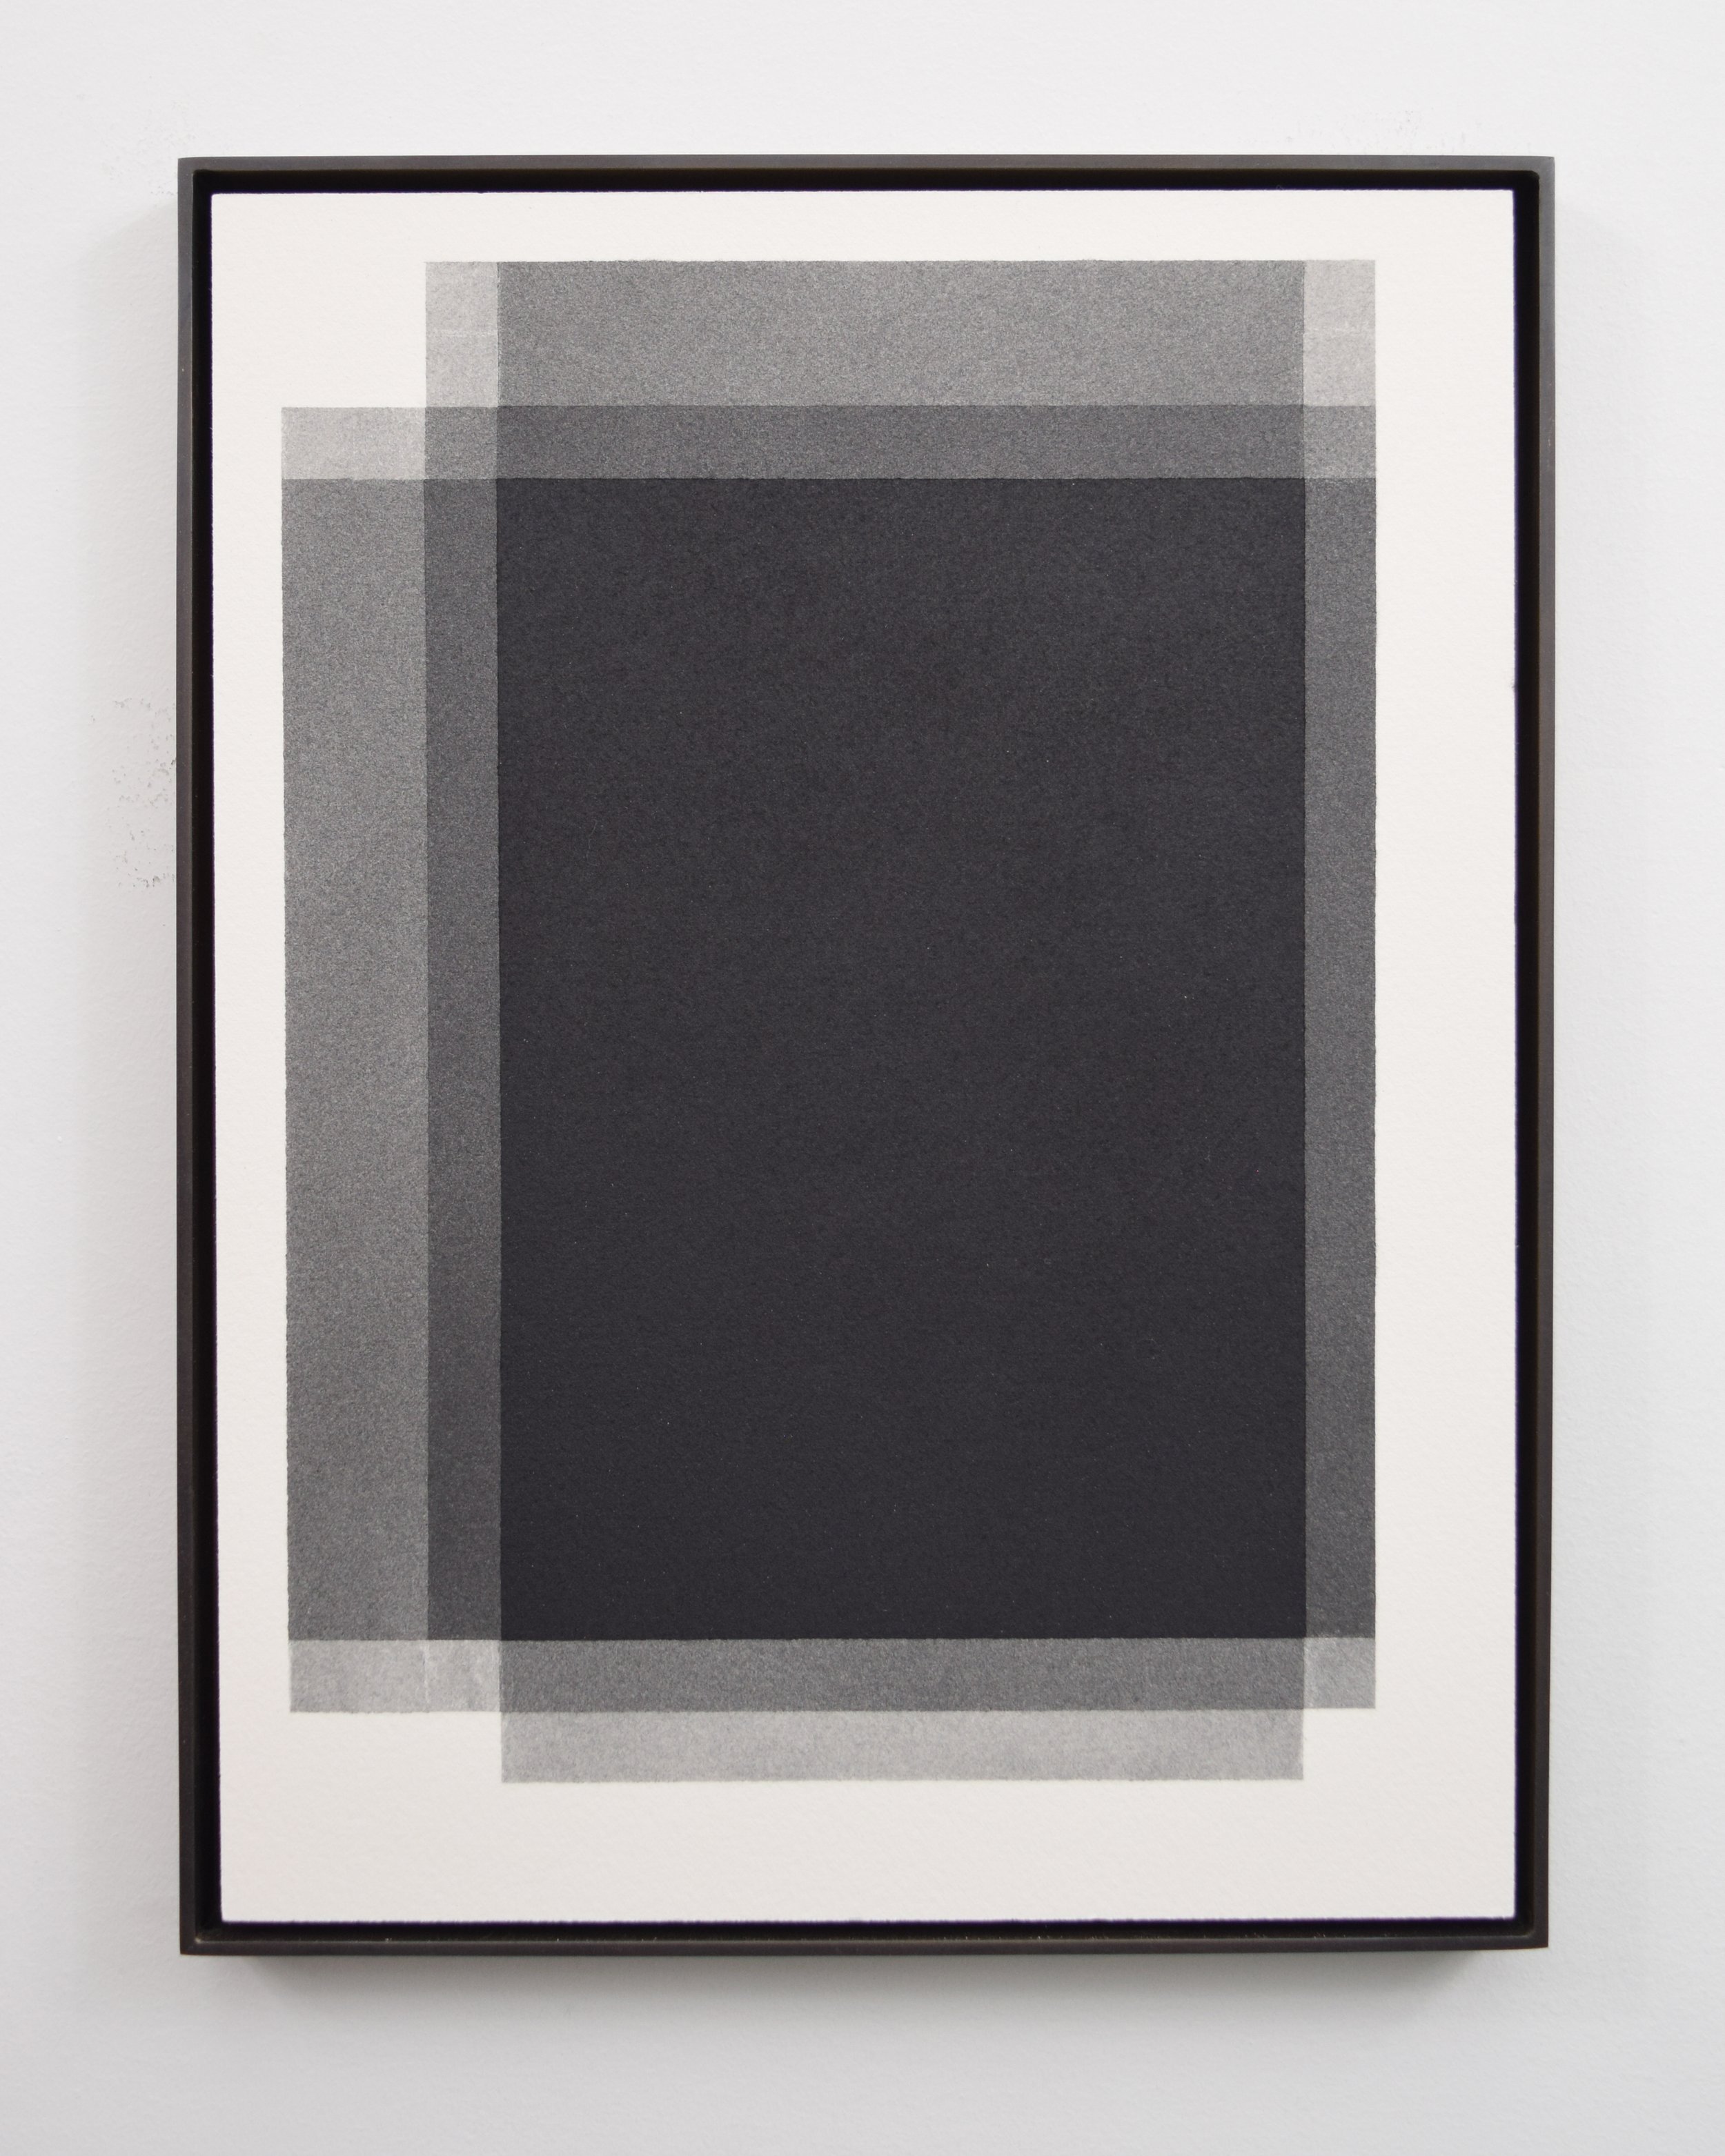  Stephen Somple  2 16 3 21 Black , 2021 Graphite and pigment on paper with oxidized brass frame 9.5" x 12.5" x .5" 